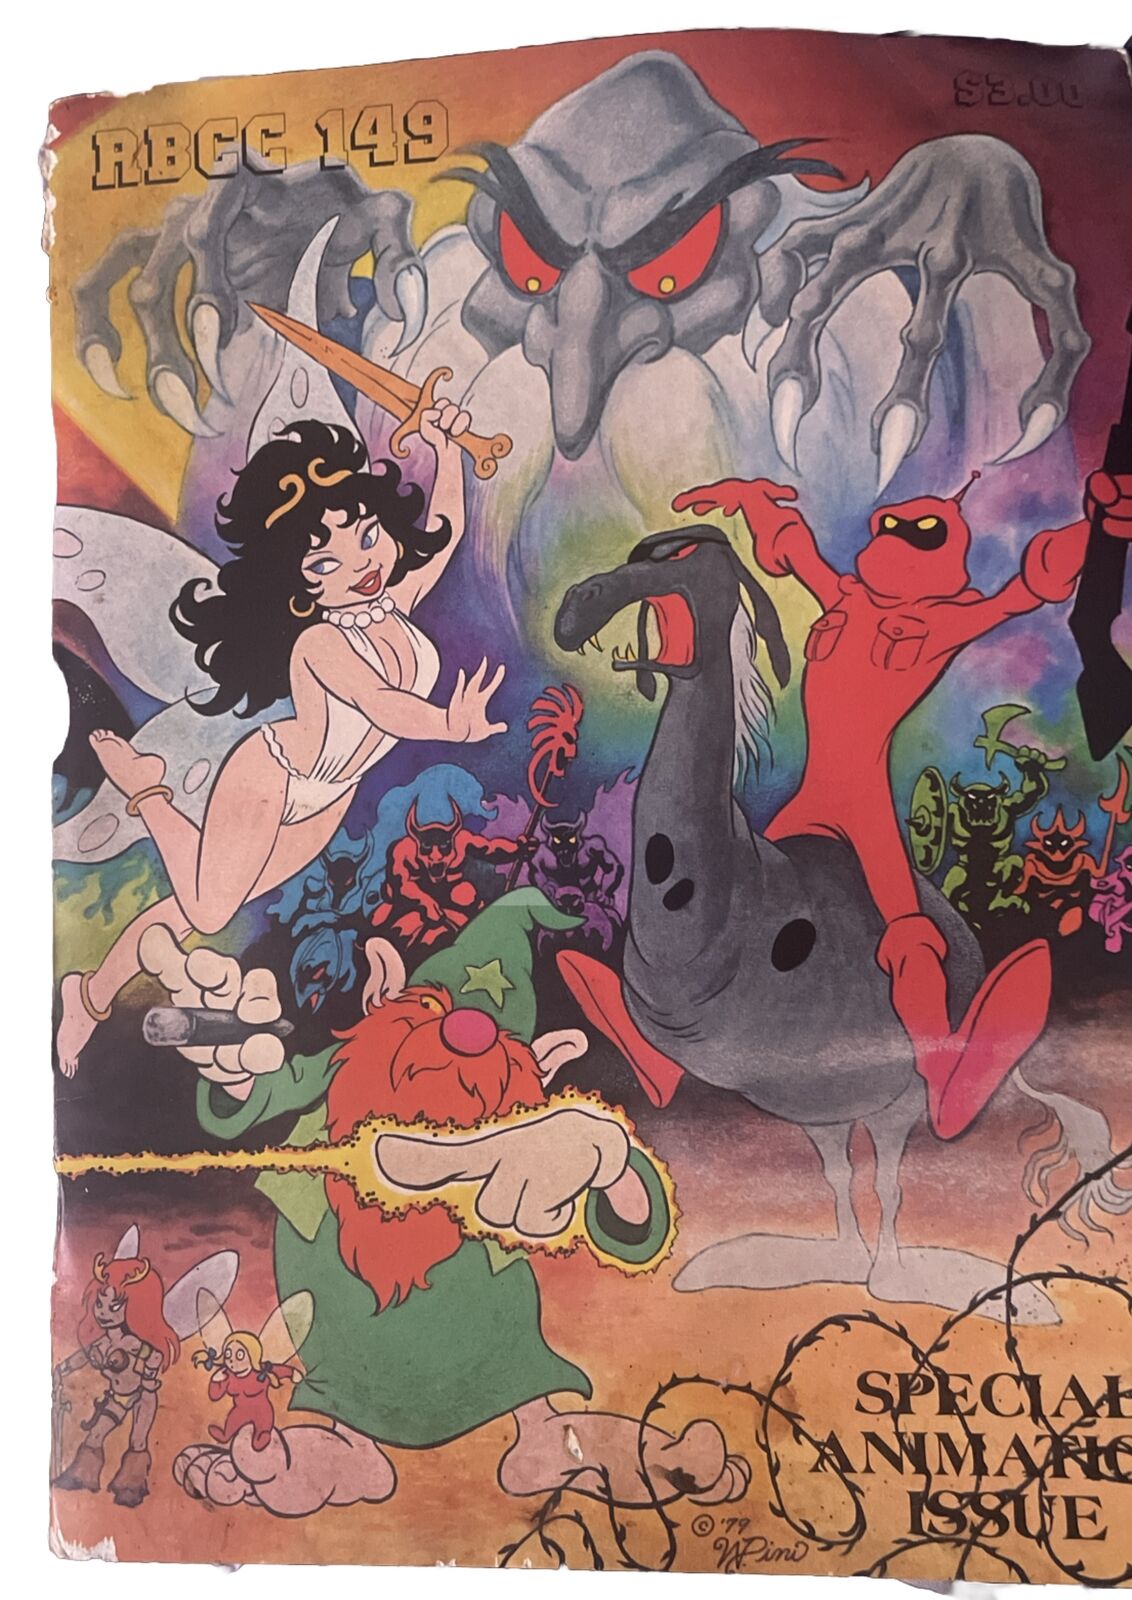 RBCC #149 SFCA 1979 Blaster’s  Special Animation Issue Ft Spider Man & Many More